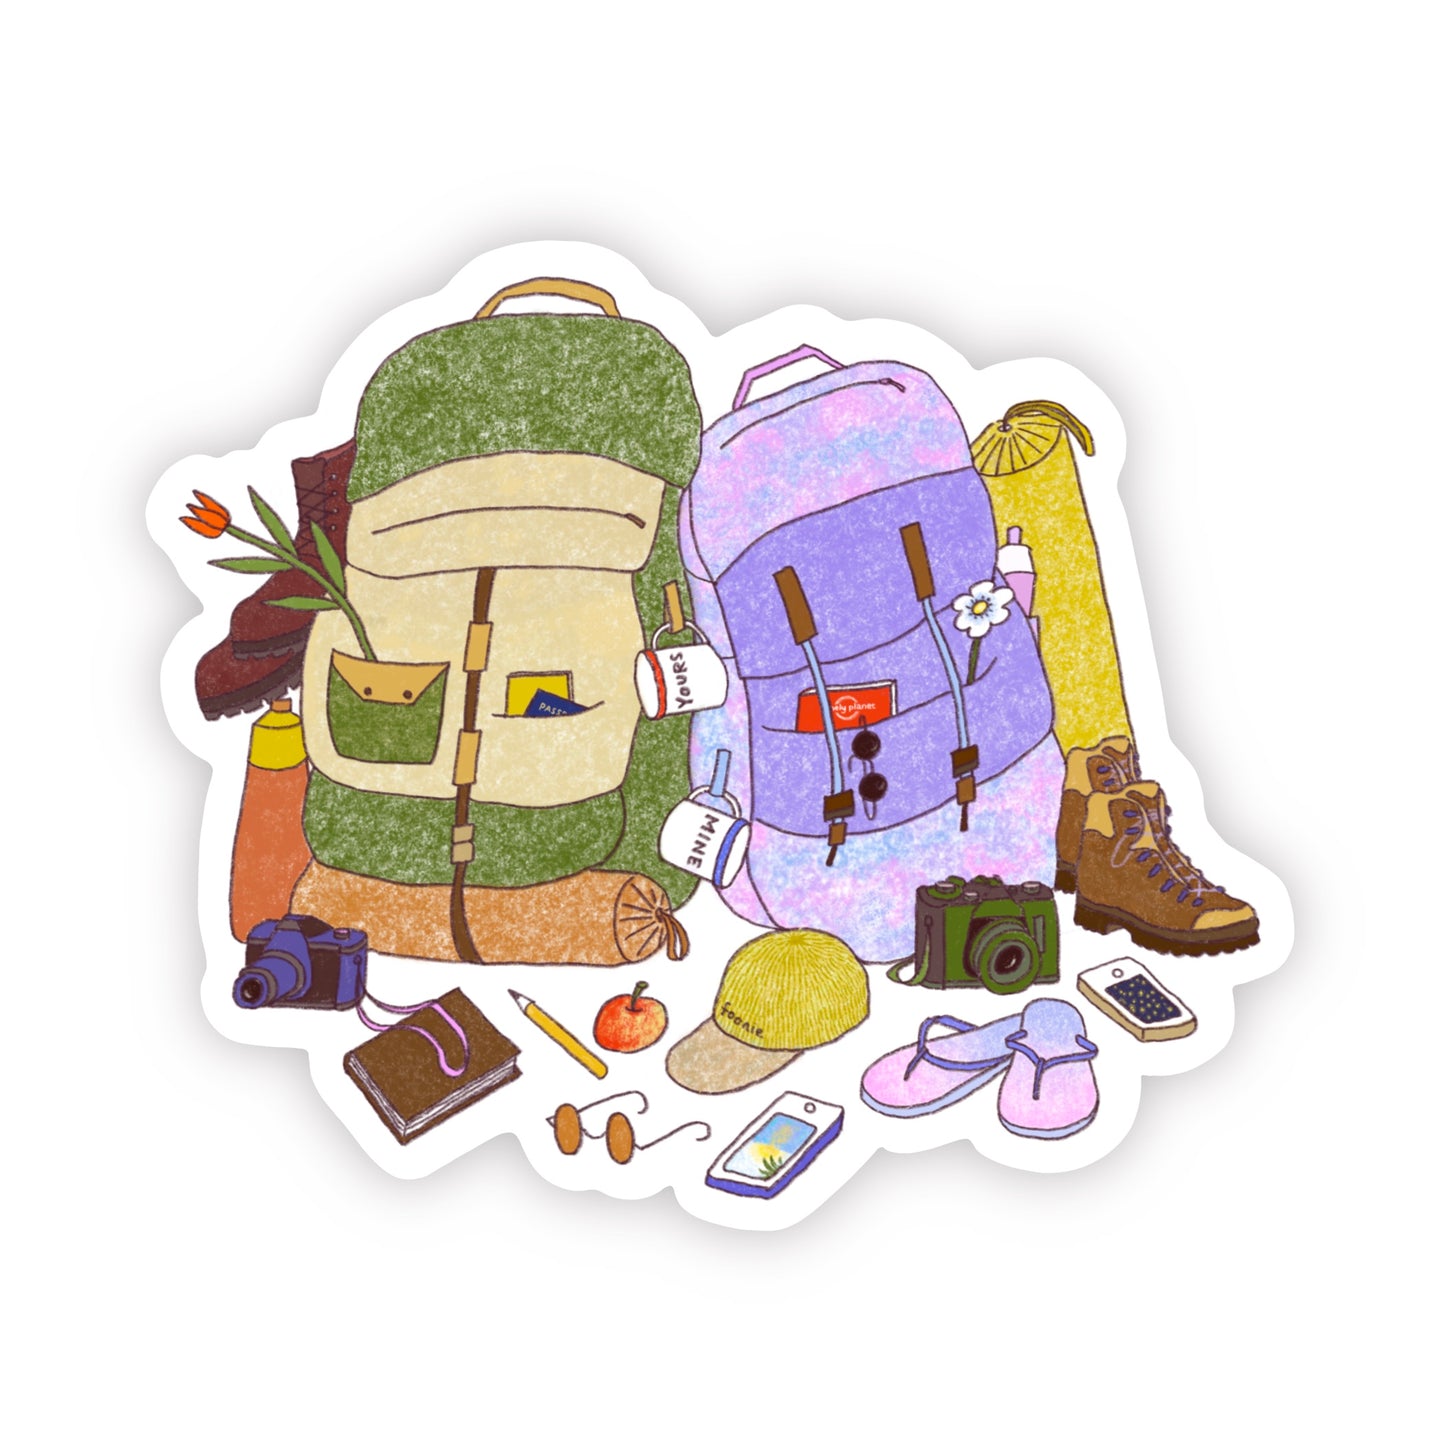 Outdoorsy waterproof die cut sticker with two backpacks and travel gears